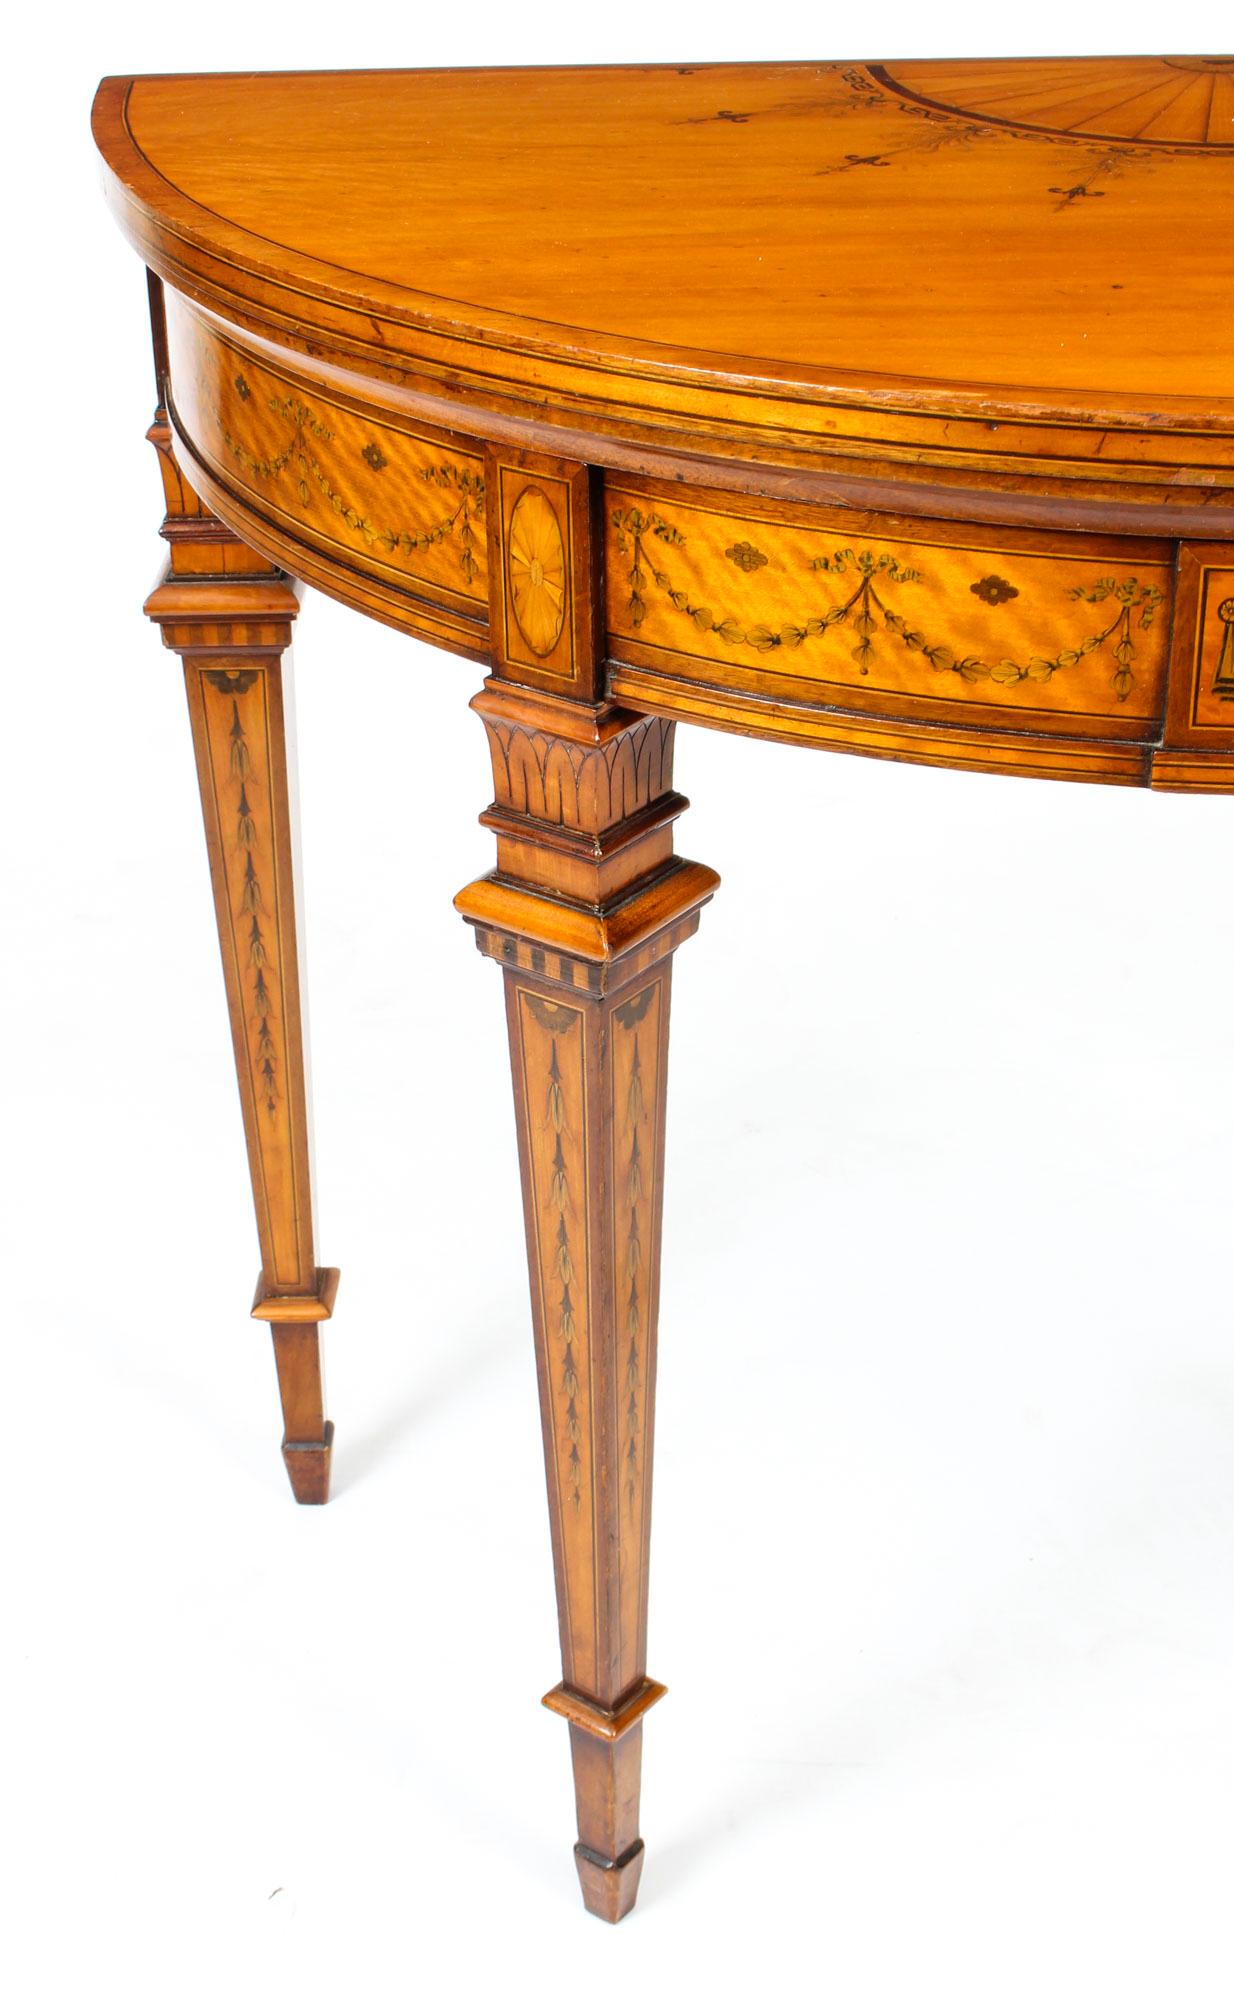 English Antique Satinwood Demilune Card Table Filmer & Son, 19th Century